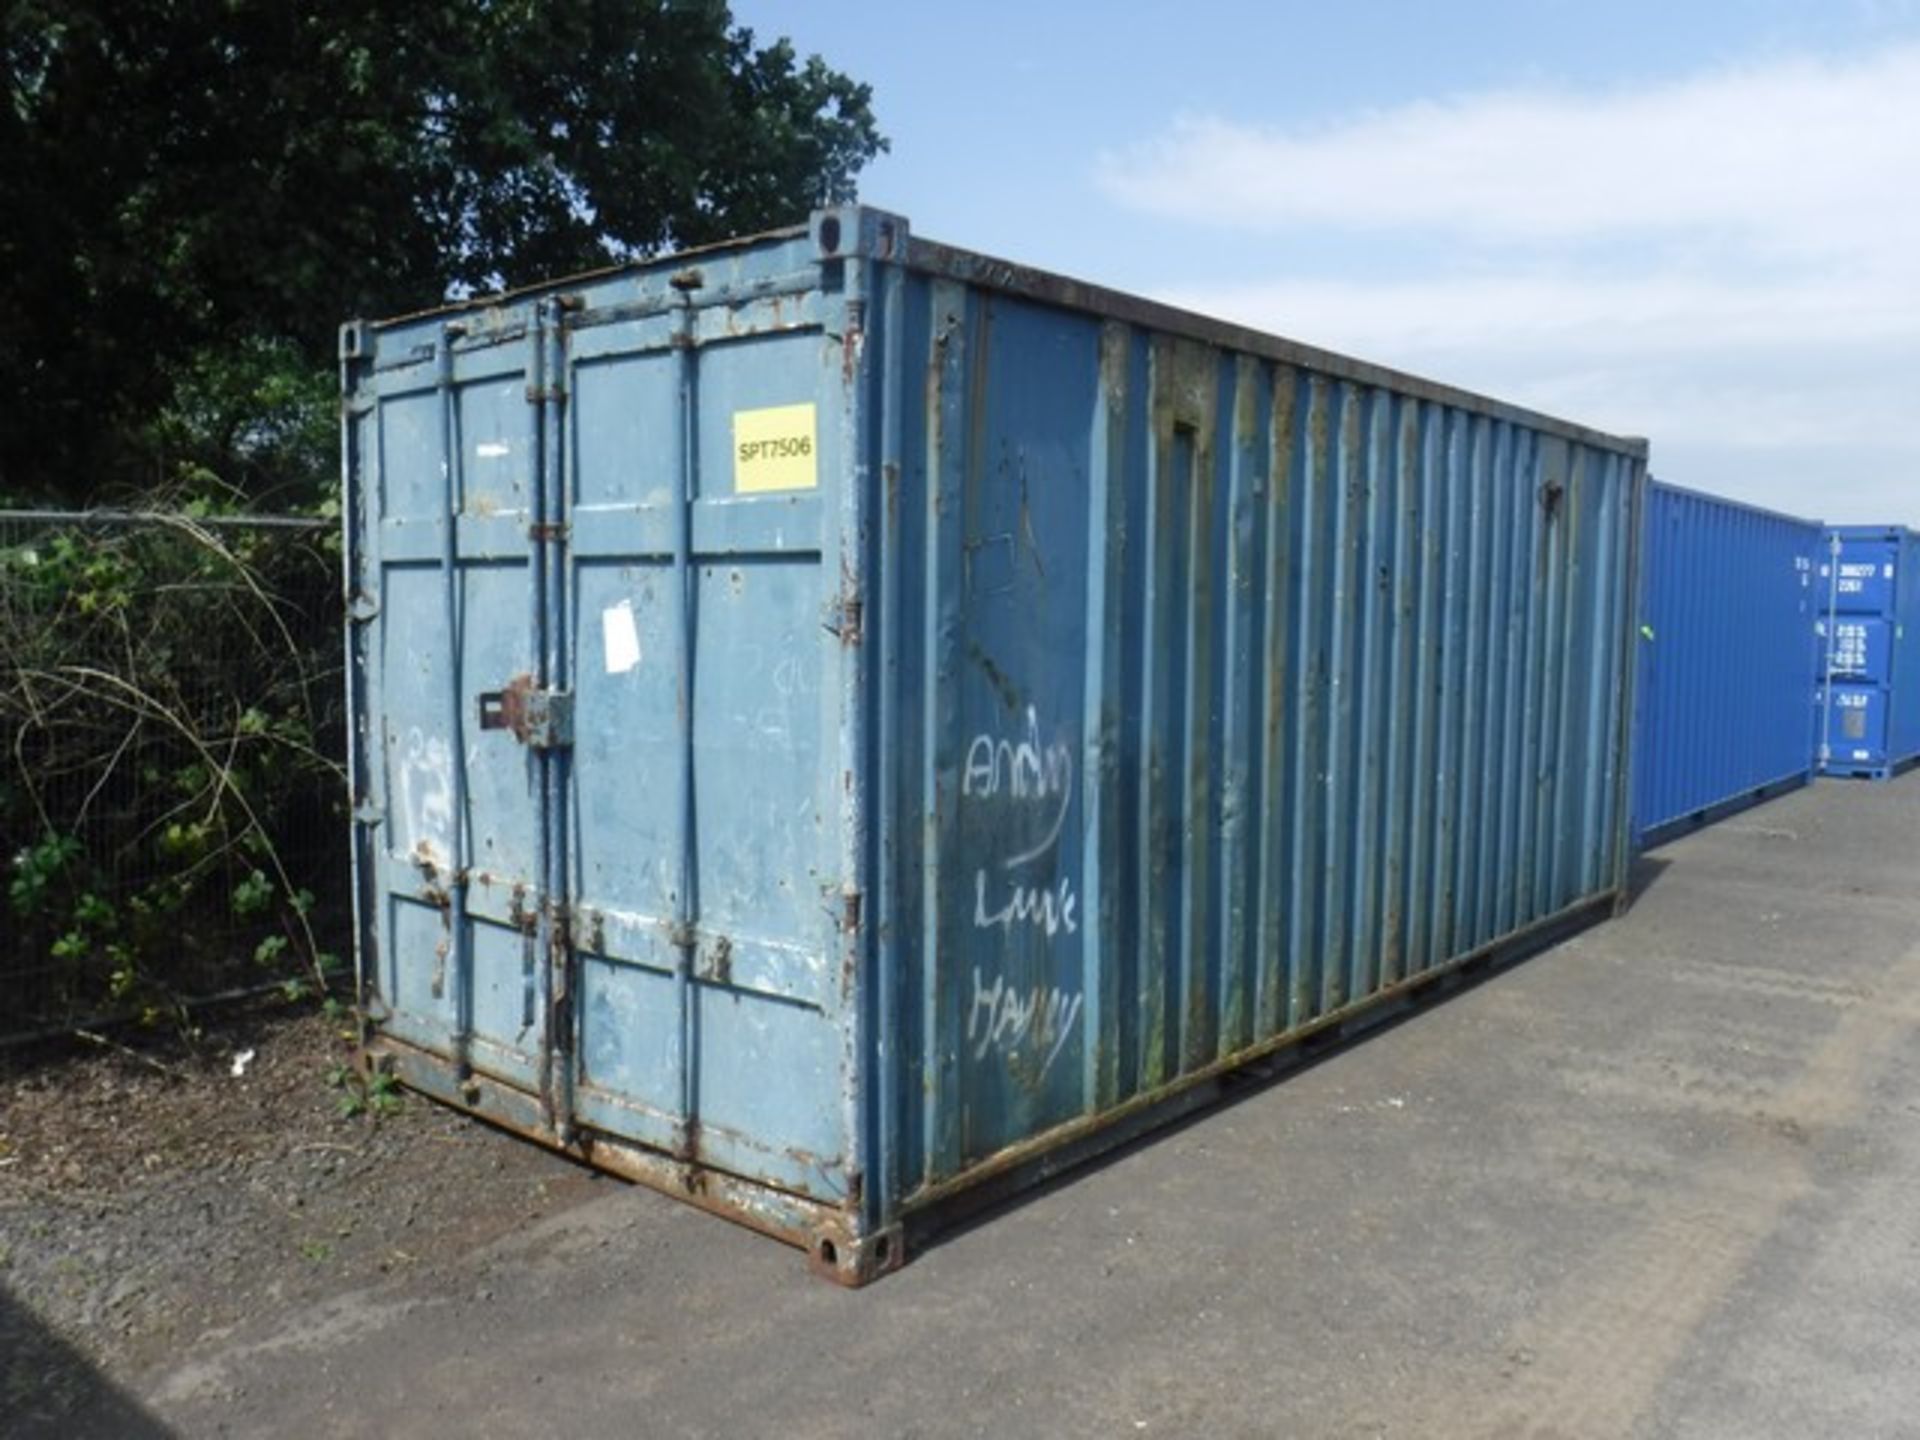 SHIPPING CONTAINER 20FT AN - SPT7506